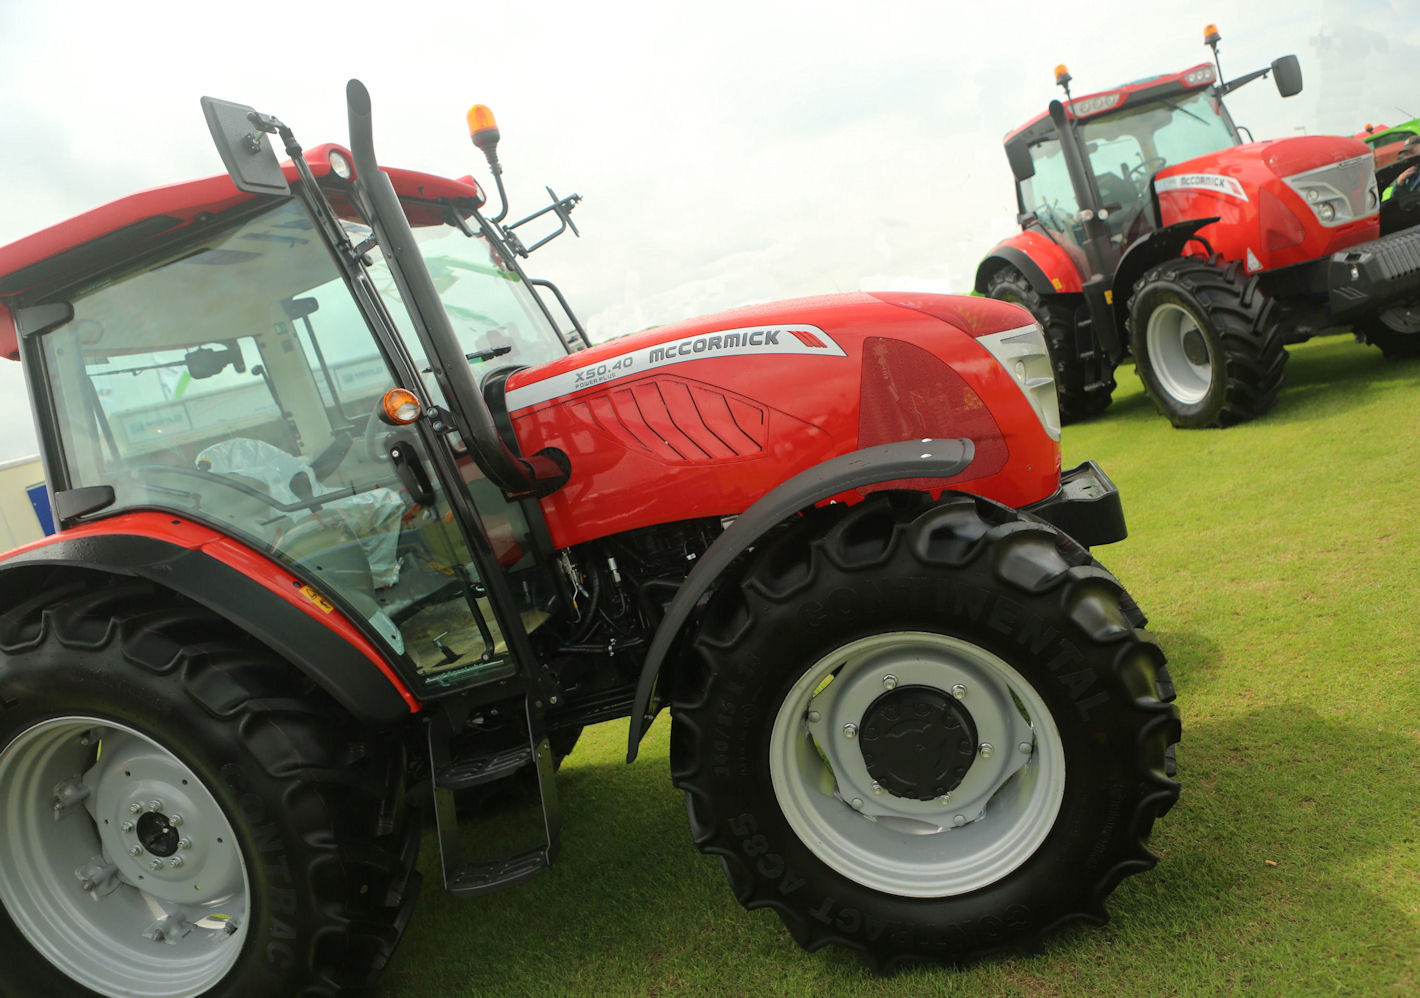 The introduction of a whole new line of modern McCormick tractors encouraged Tim Hubert and his team to take on the sales, service and parts franchise.